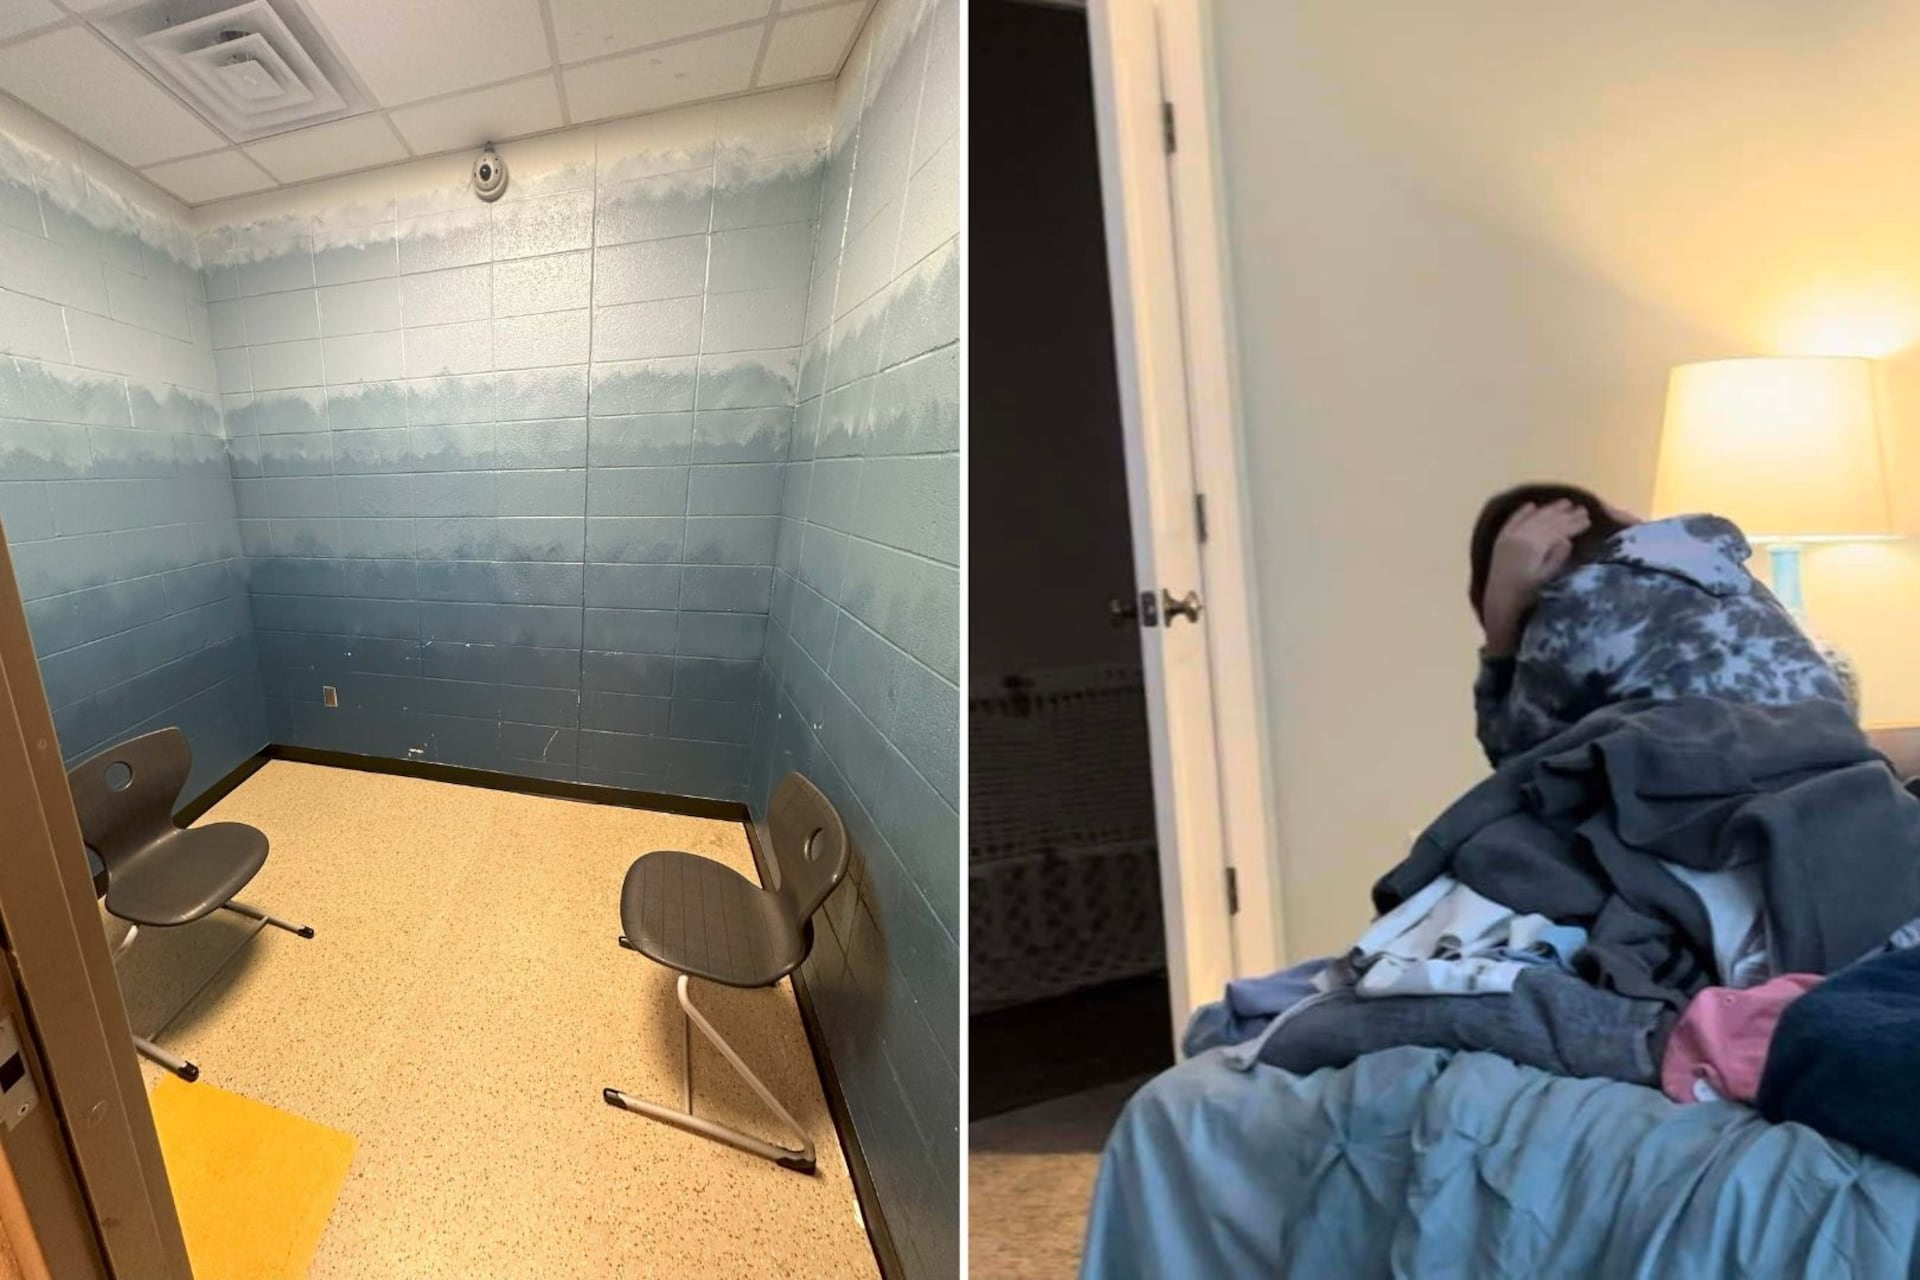 Two photos: on the left, an empty room. On the right, a boy sits on a bed covering his face